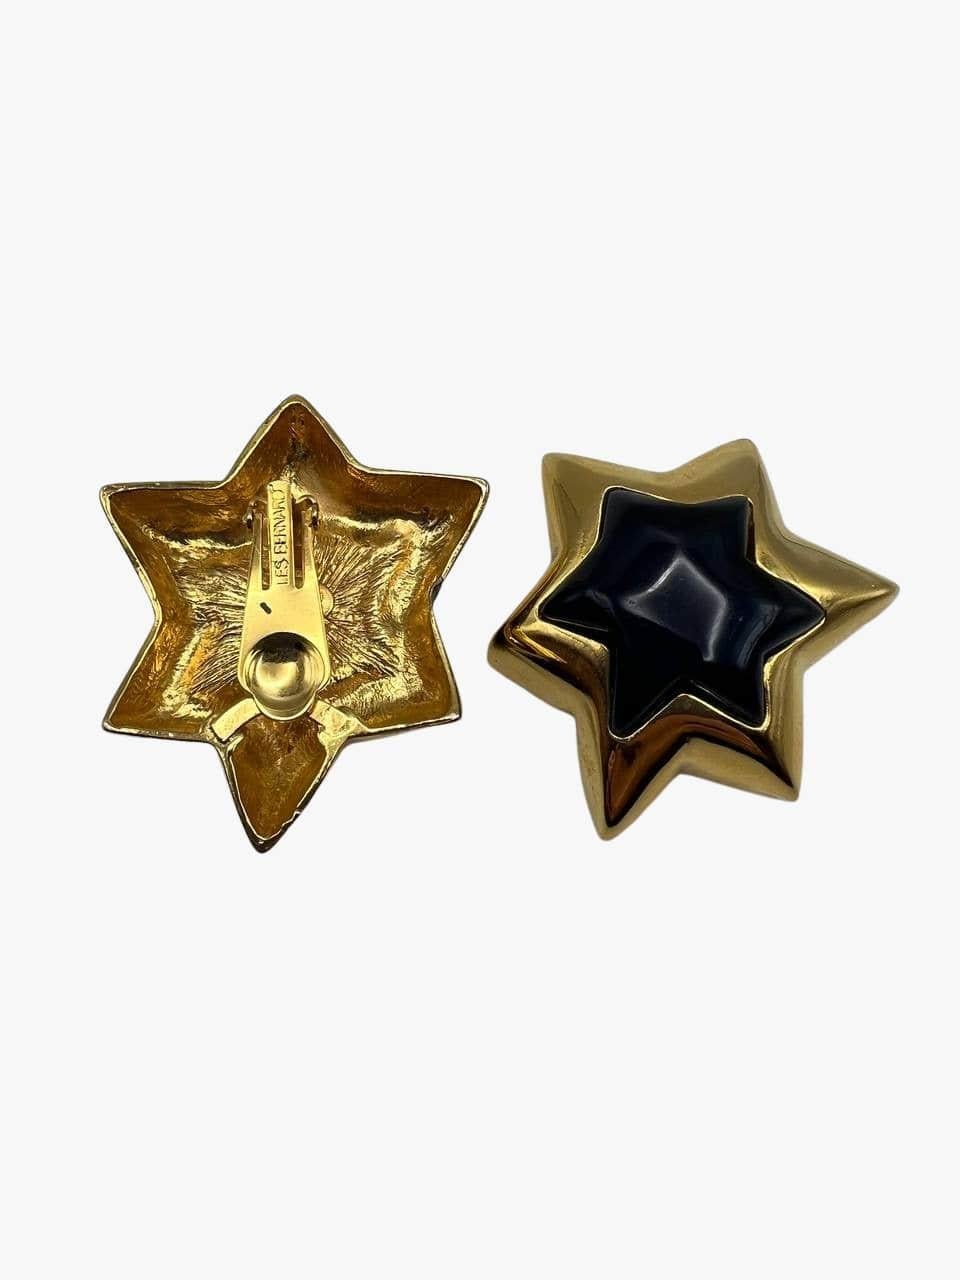 Vintage large clip-on earrings imitating stars by Les Bernard. 
Gold tone metal and black enamel. 
Signed. Made in USA. 
Period: 1980s
Diameter: 5cm

Condition: Very good. Light scratches through metal.

........Additional information ........

-